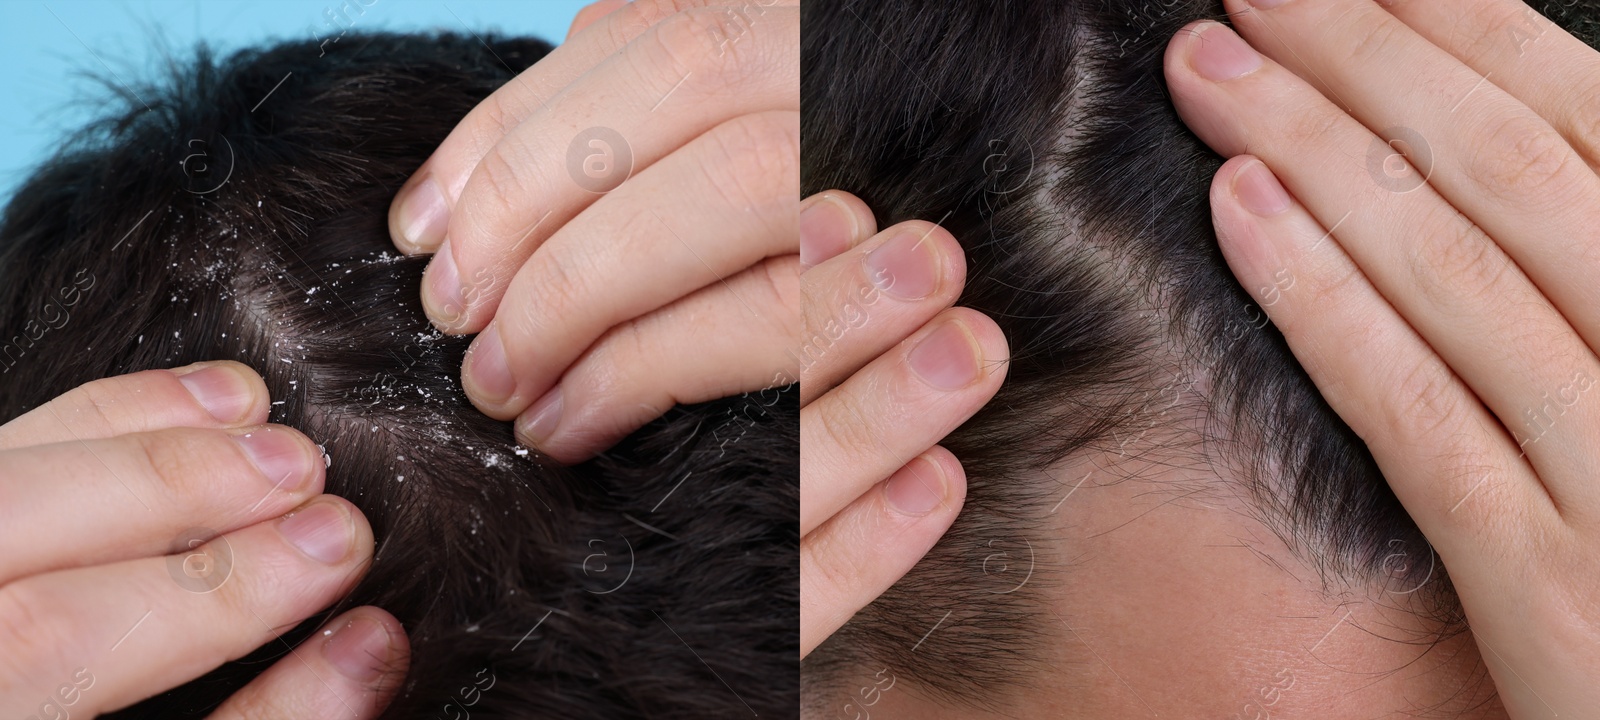 Image of Man showing hair before and after dandruff treatment, collage